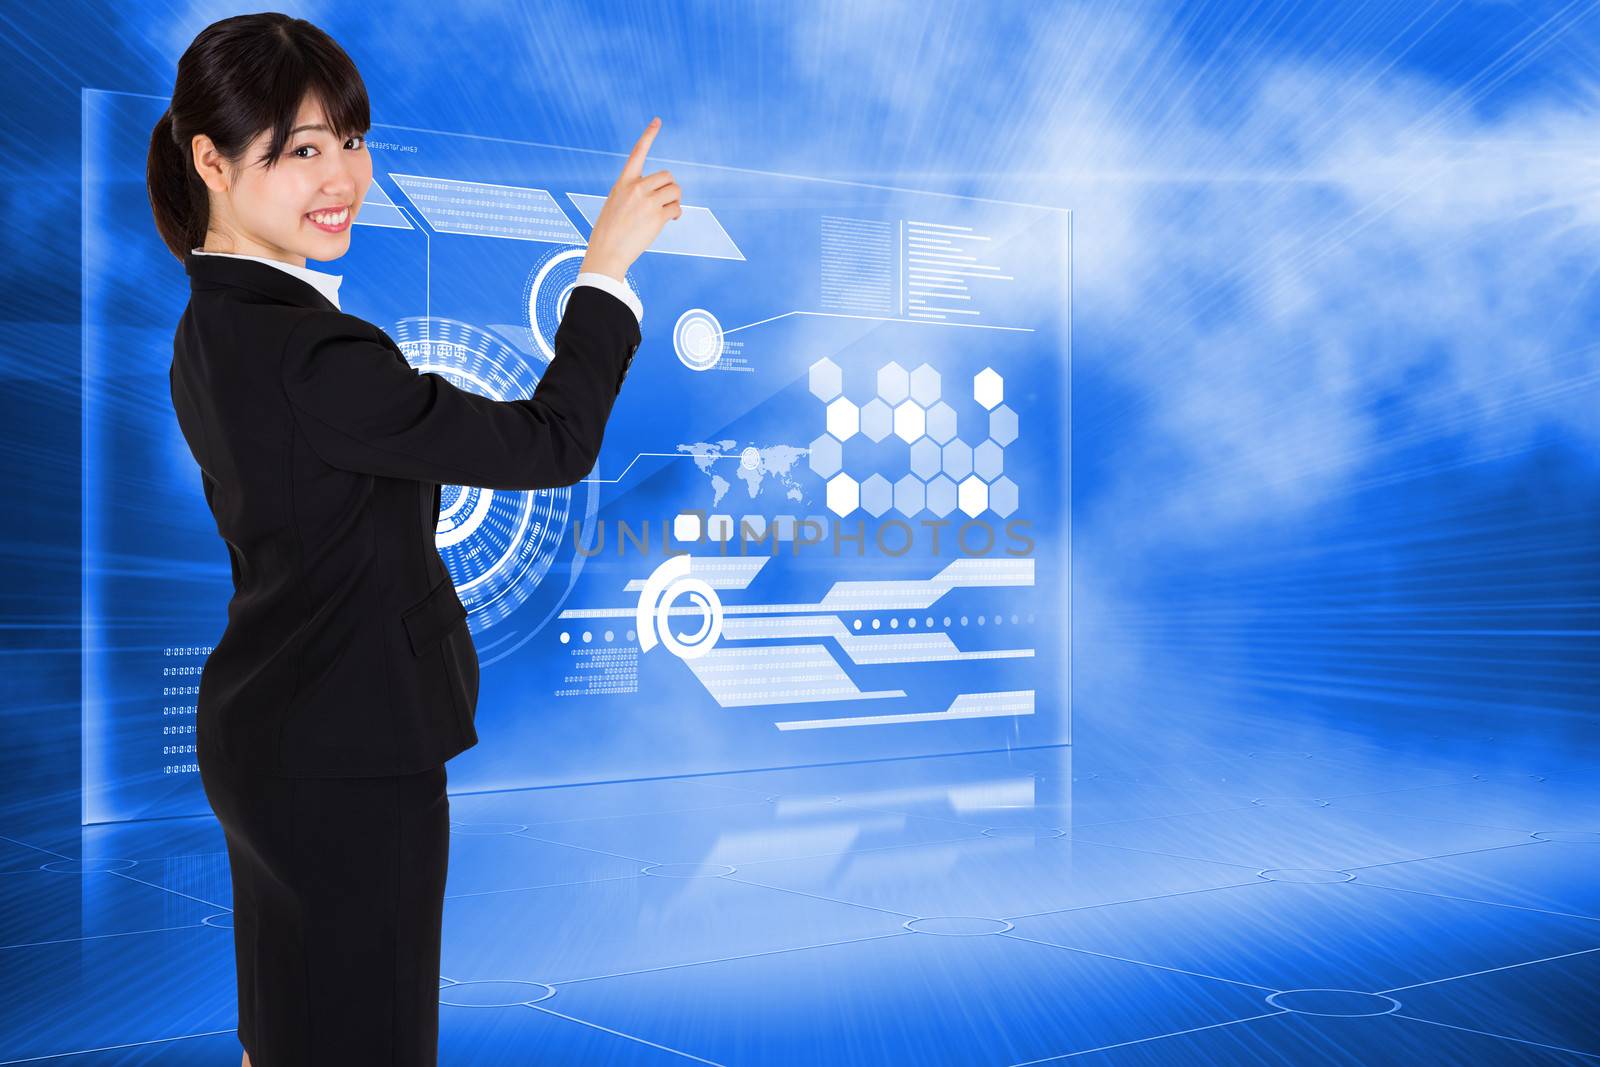 Smiling businesswoman pointing against futuristic technology interface